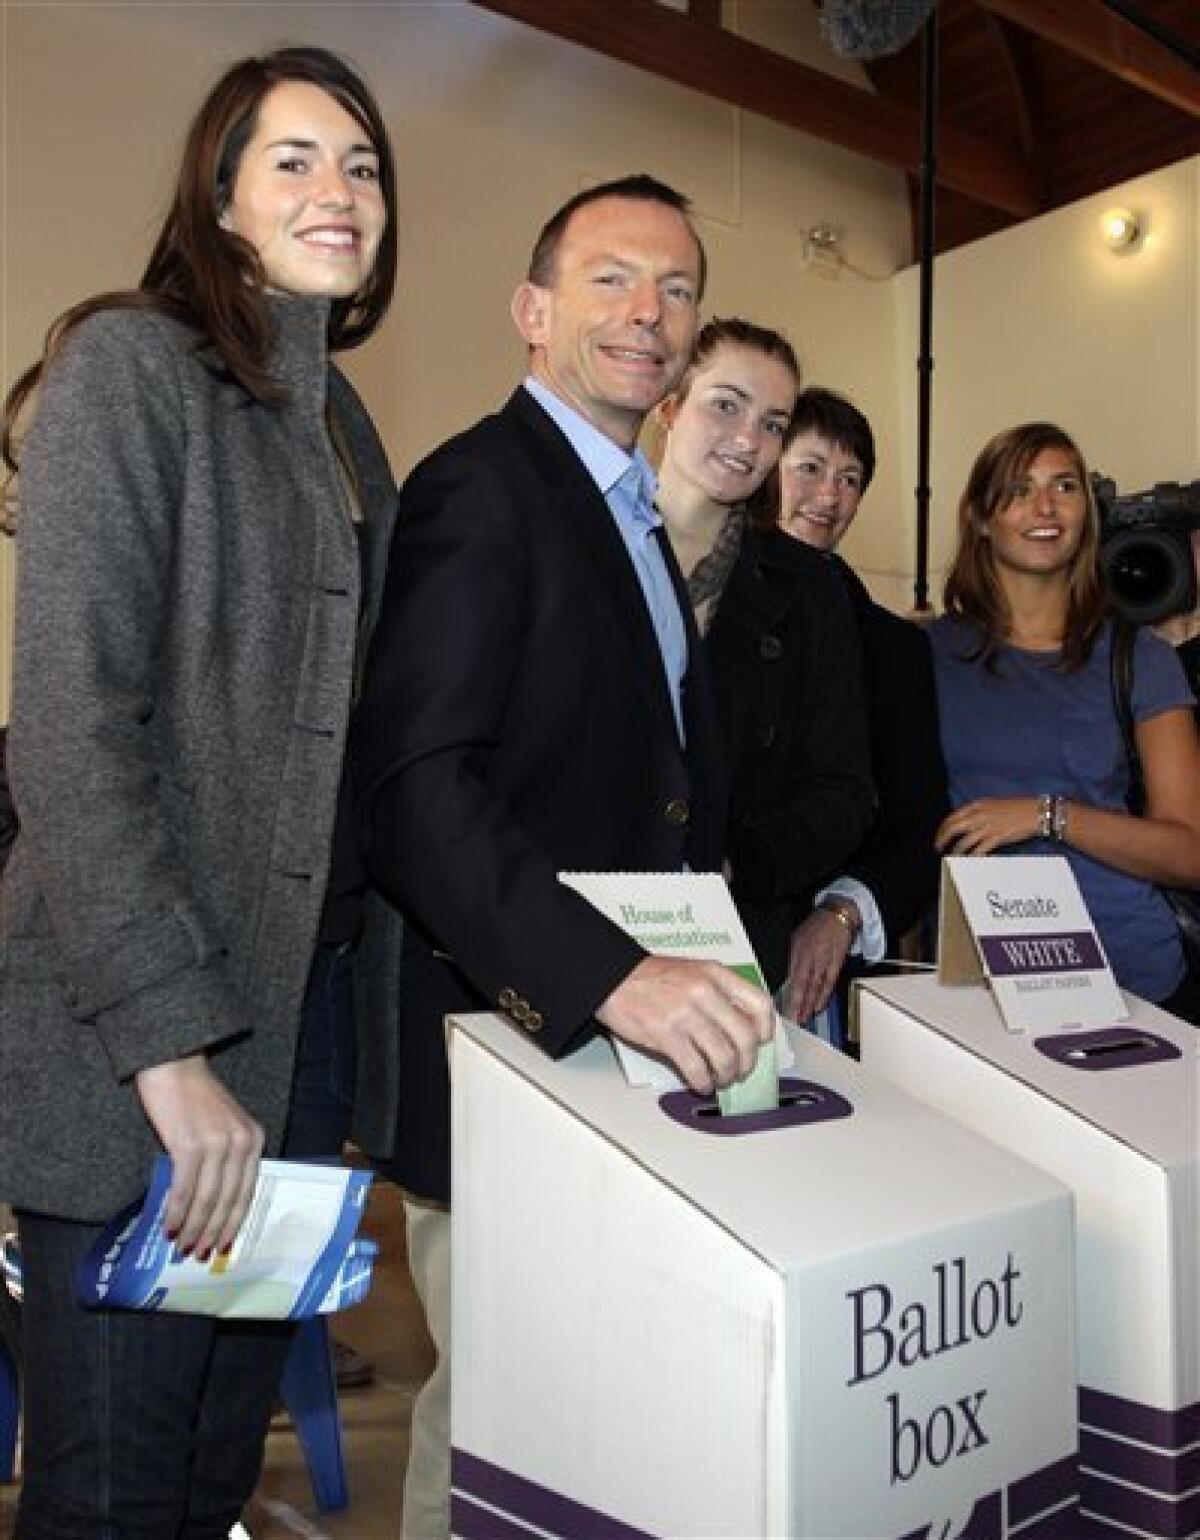 Australia's opposition leader Tony Abbott, 2nd left, with his daughter Louise, left, Frances, 3rd left, Bridget, right, and wife Margie votes at Queenscliff Beach polling station in Sydney, Australia, Saturday, Aug. 21, 2010. (AP Photo/Rob Griffith)